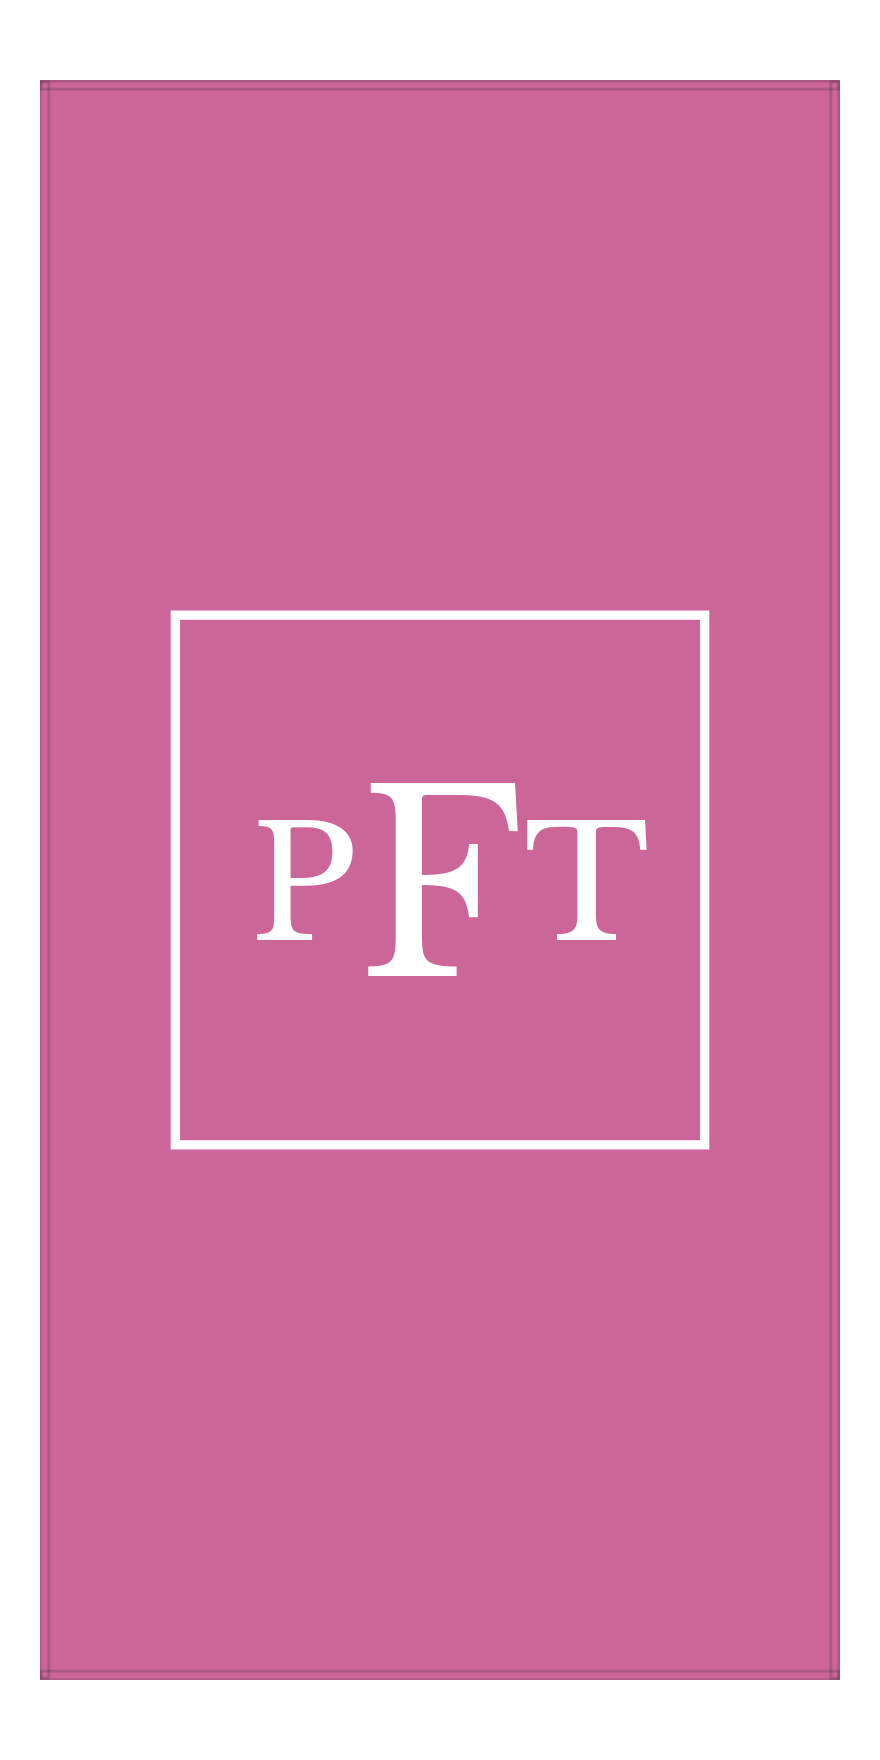 Personalized Solid Color Beach Towel - Vertical - Square - Pink and White - Monogram - Front View